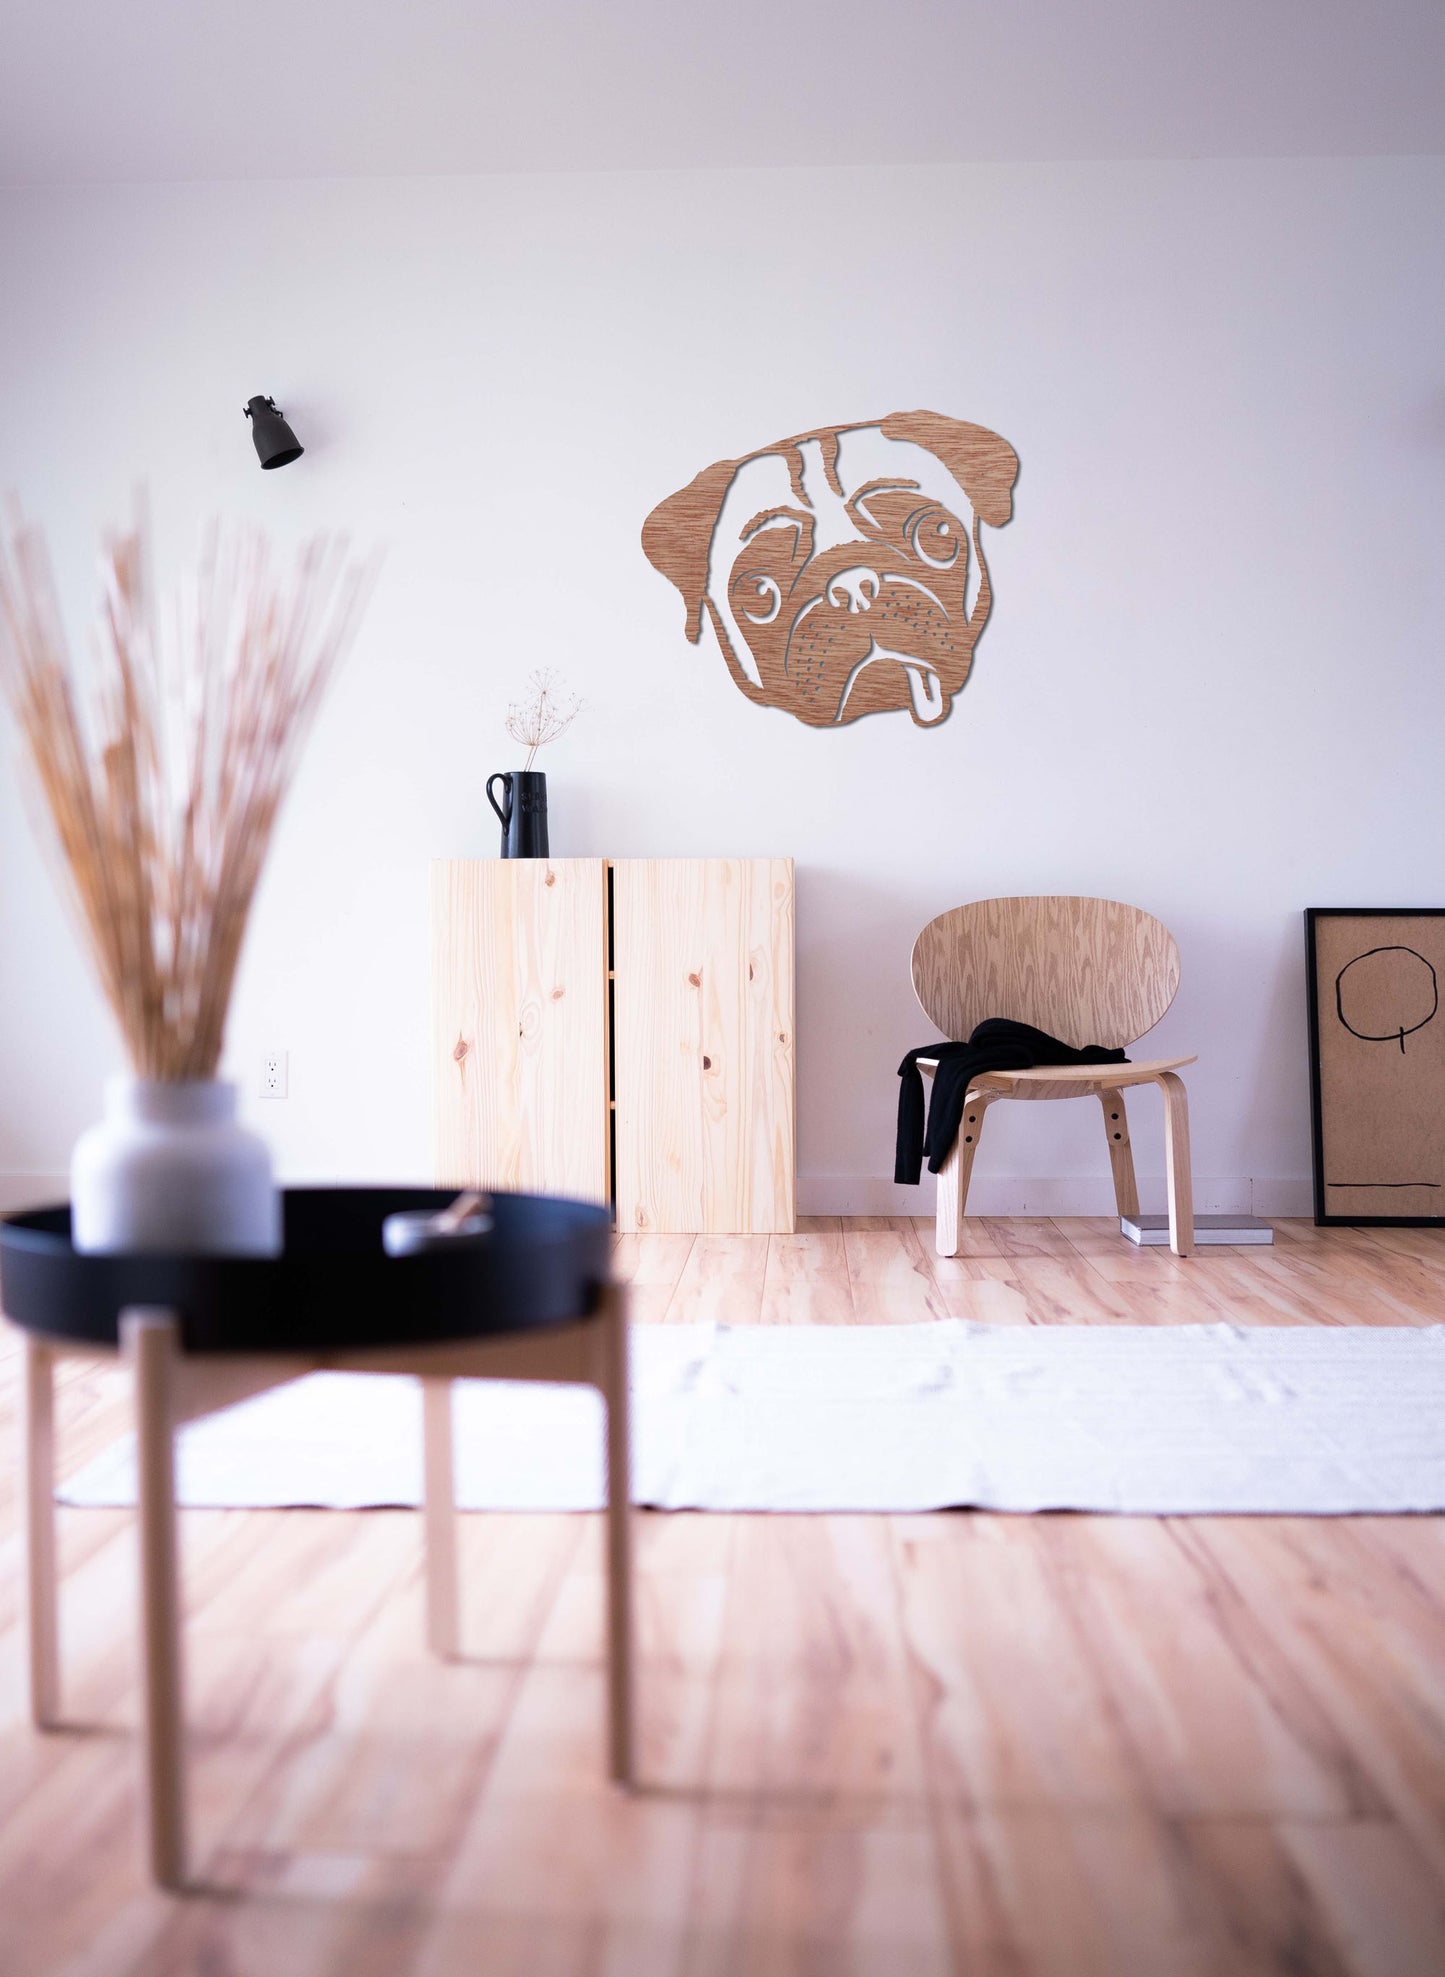 Wooden wall decoration - Pug